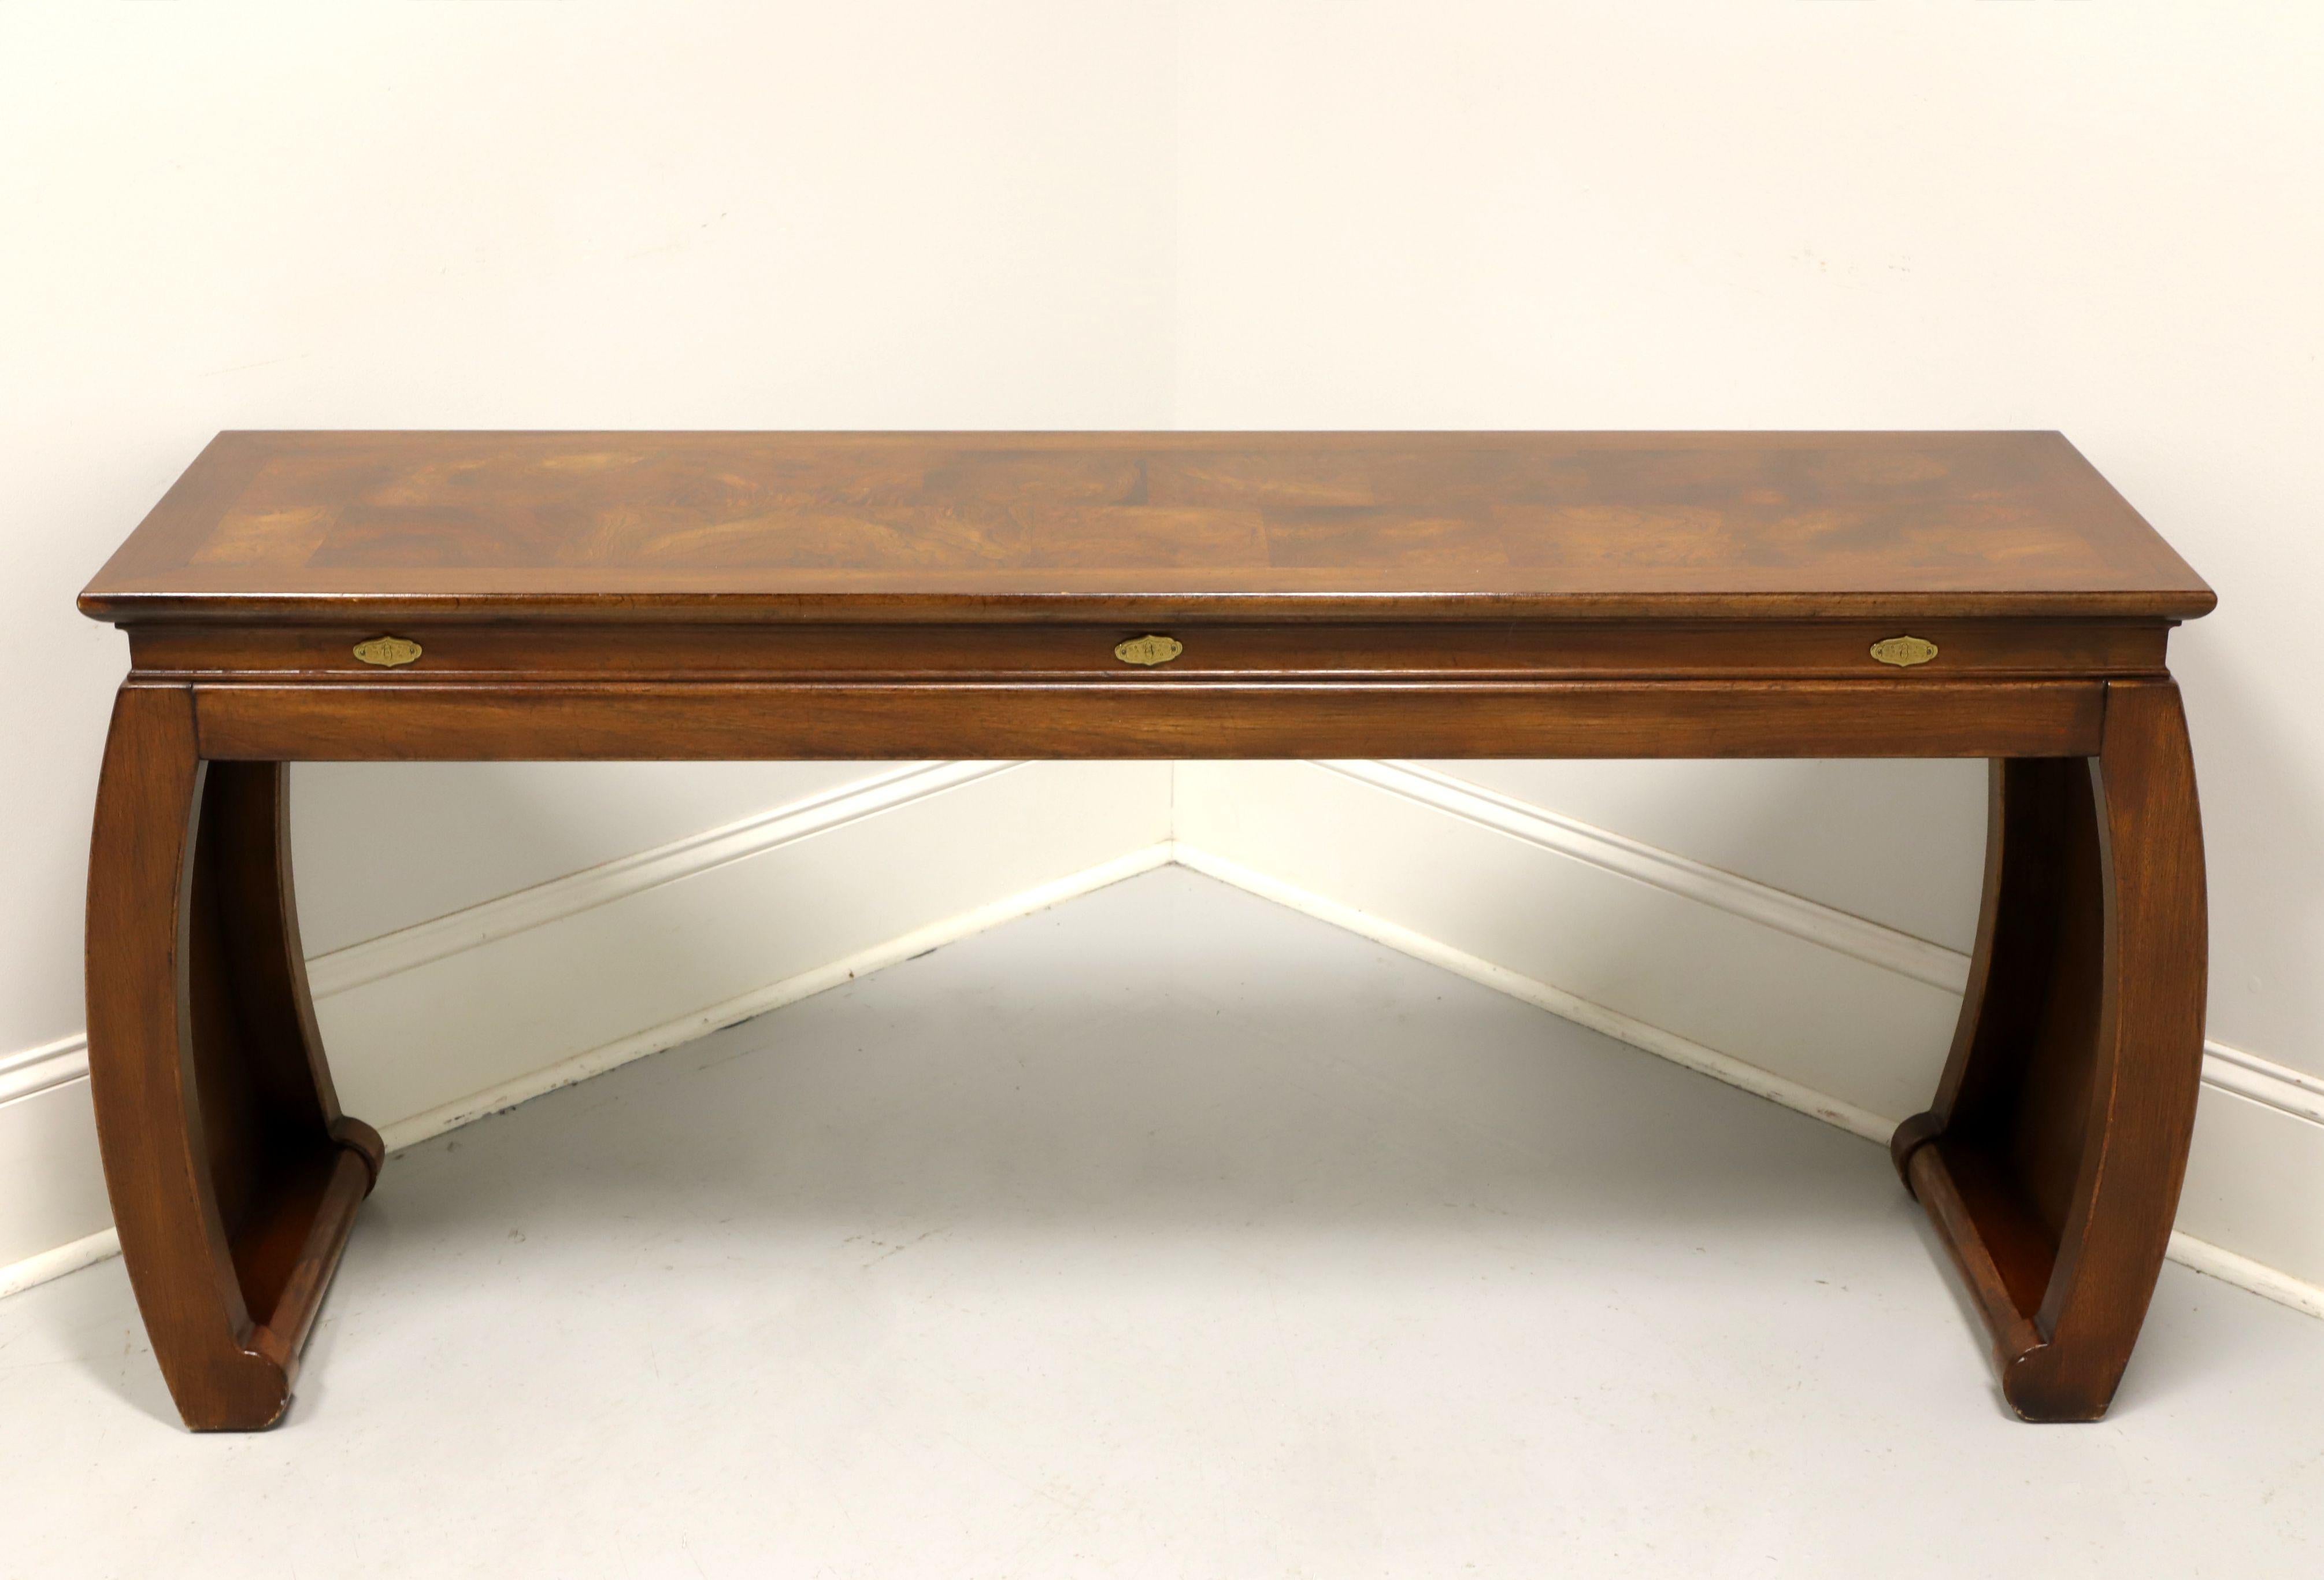 An Asian style sofa table by Gordon's Furniture, of Johnson City, Tennessee, USA. Fruitwood with a banded inlaid burlwood parquetry design to the top, brass escutcheon accents to apron, and solid scroll legs. Made in the late 20th